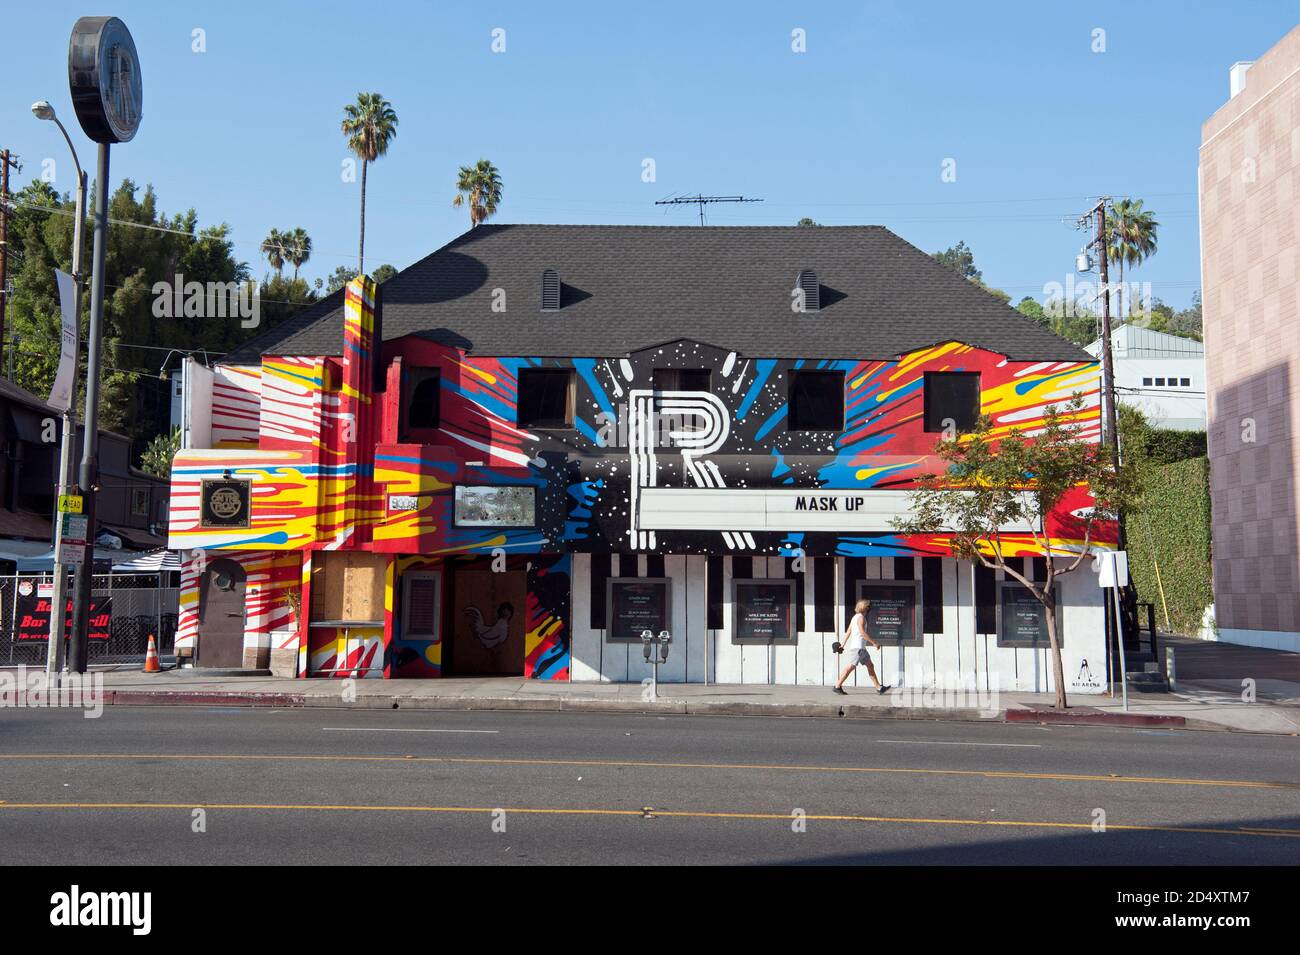 The Roxy nightclub, like others on theSunset Strip, is closed during the Corona Virus epidemic. Los Angeles,CA. Stock Photo